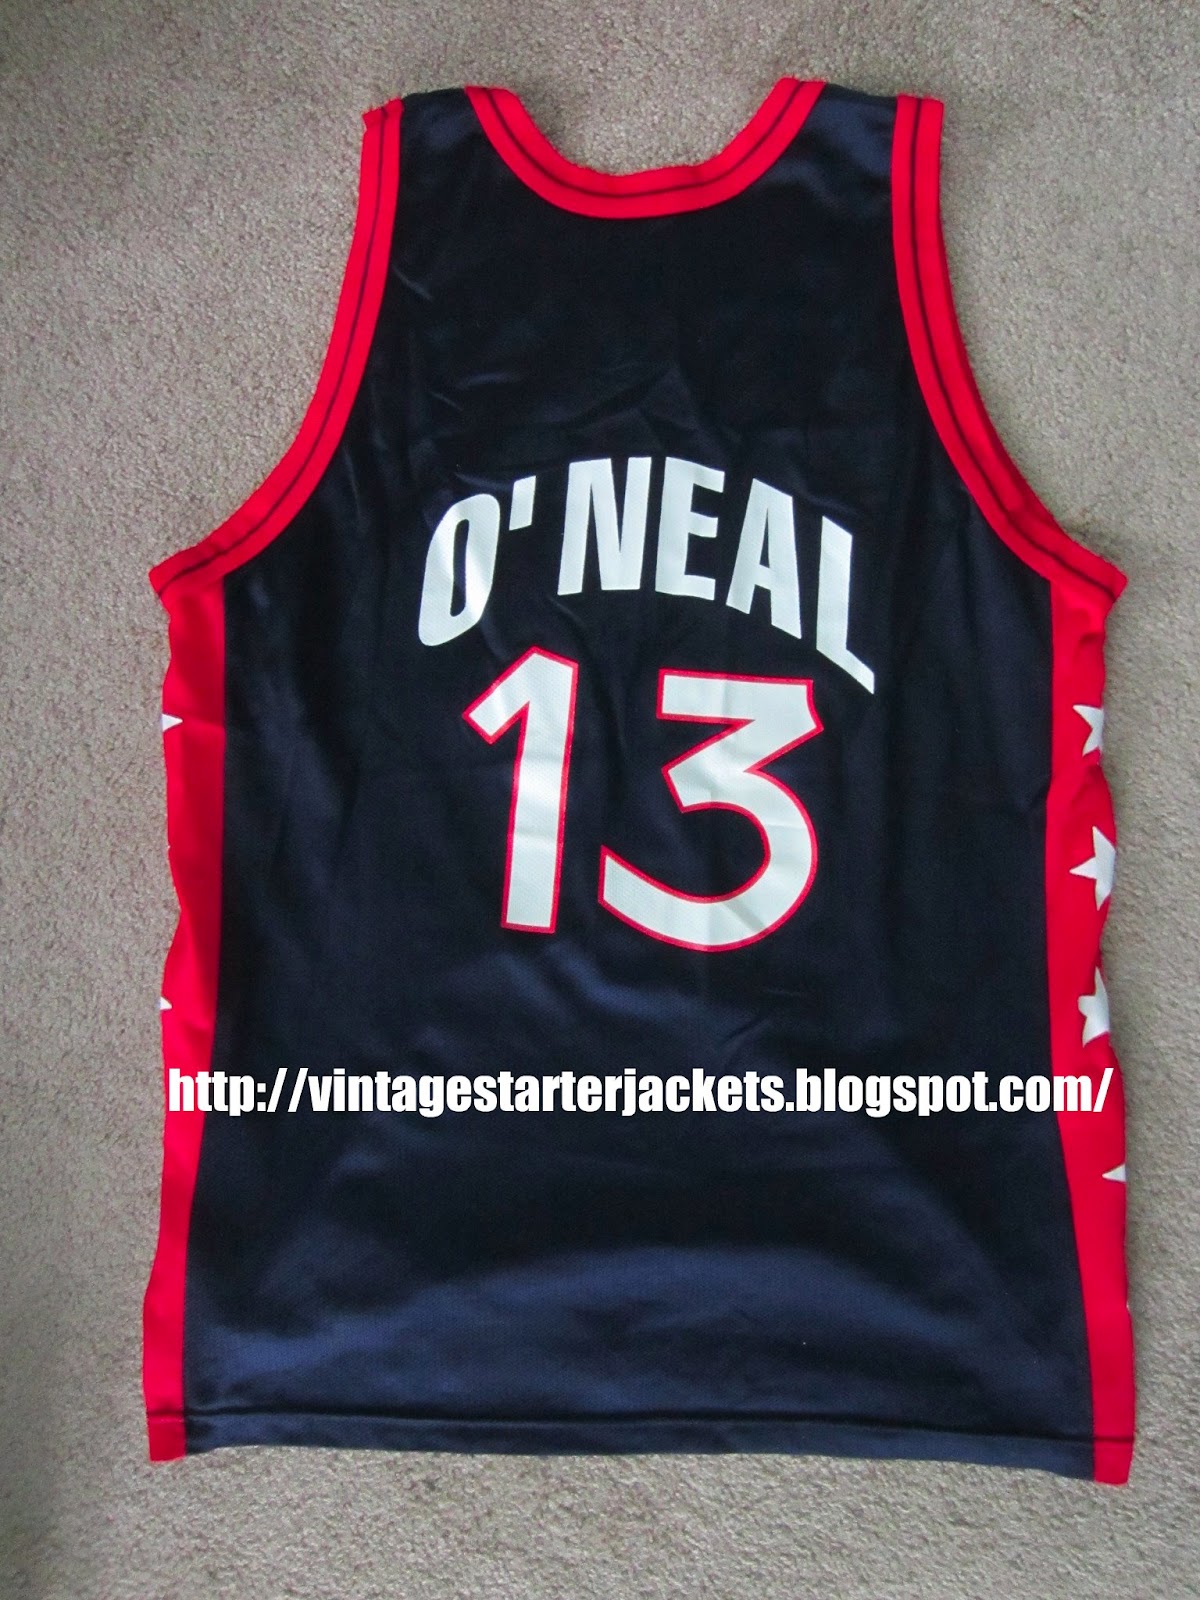 Vintage Sports Apparel: Vintage Shaquille O'Neal Olympic Champion